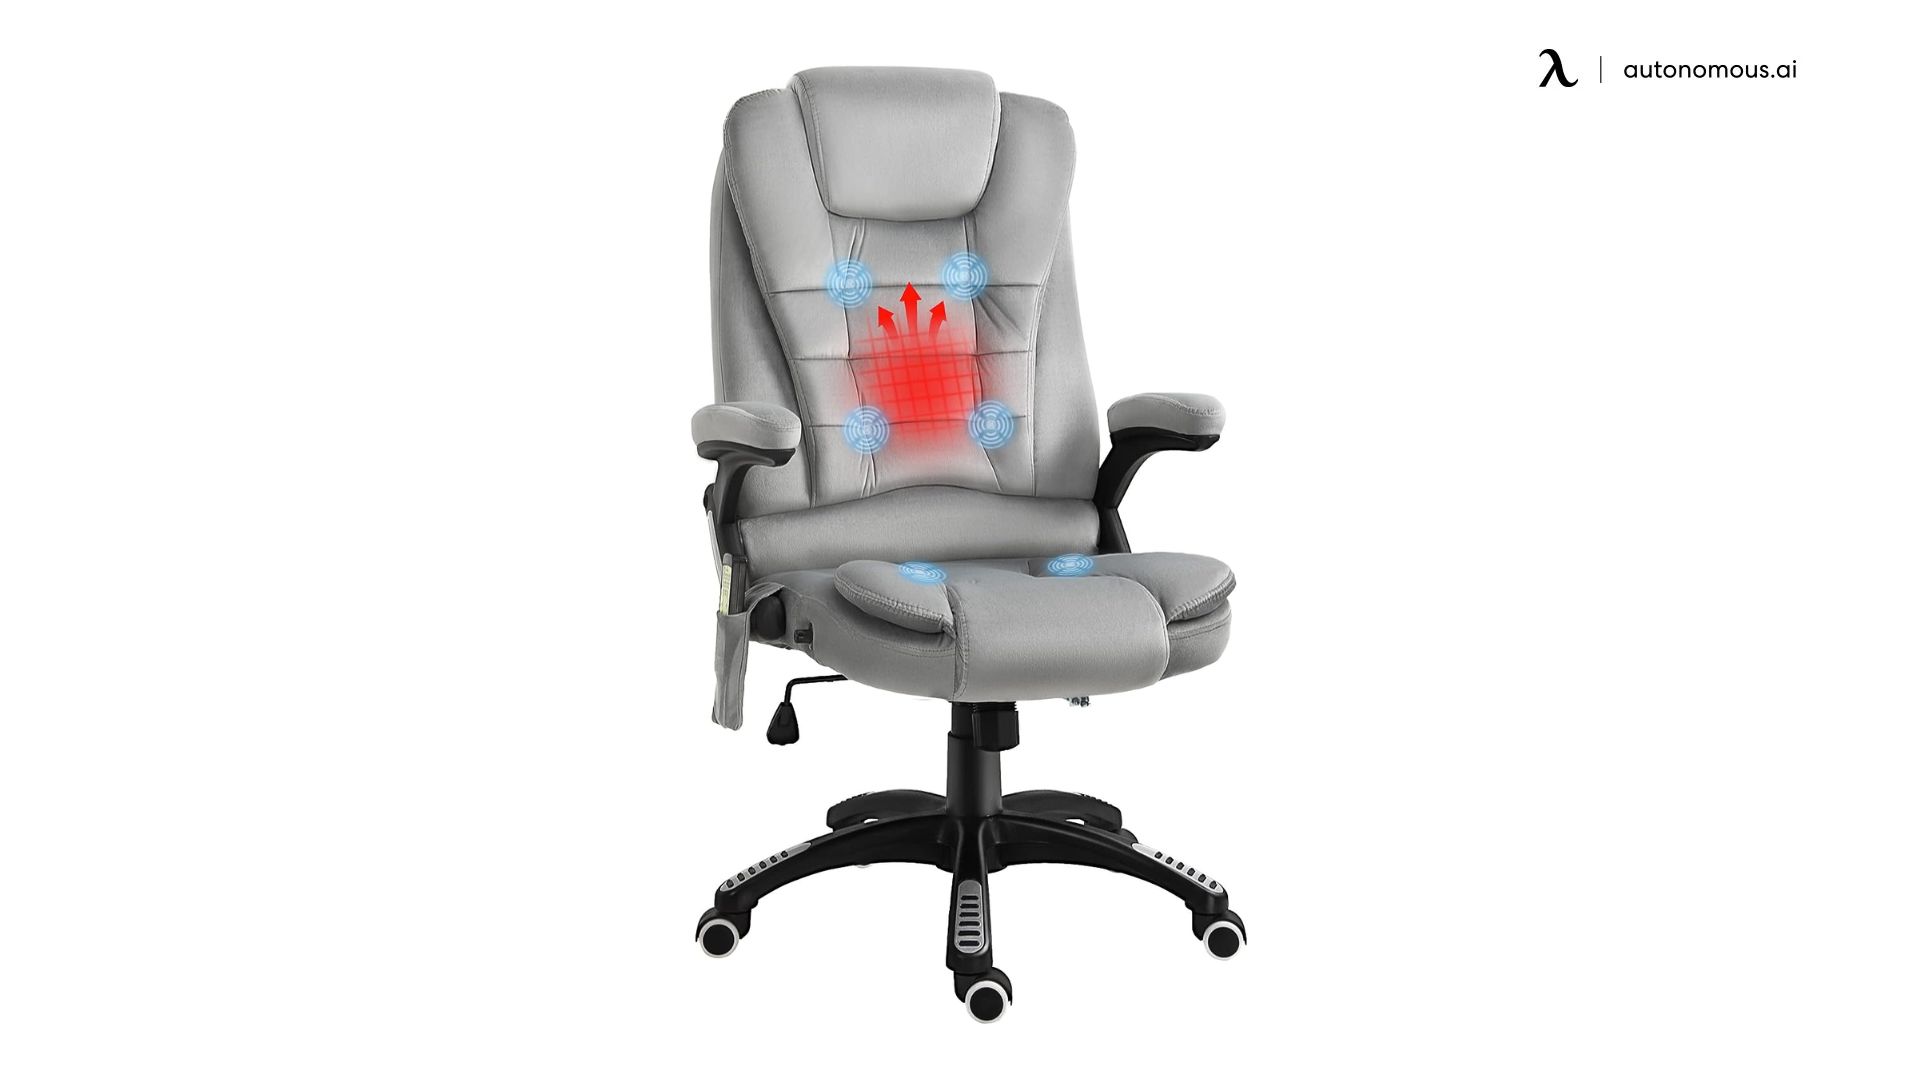 6 Point Vibration Massage Office Chair with Heat